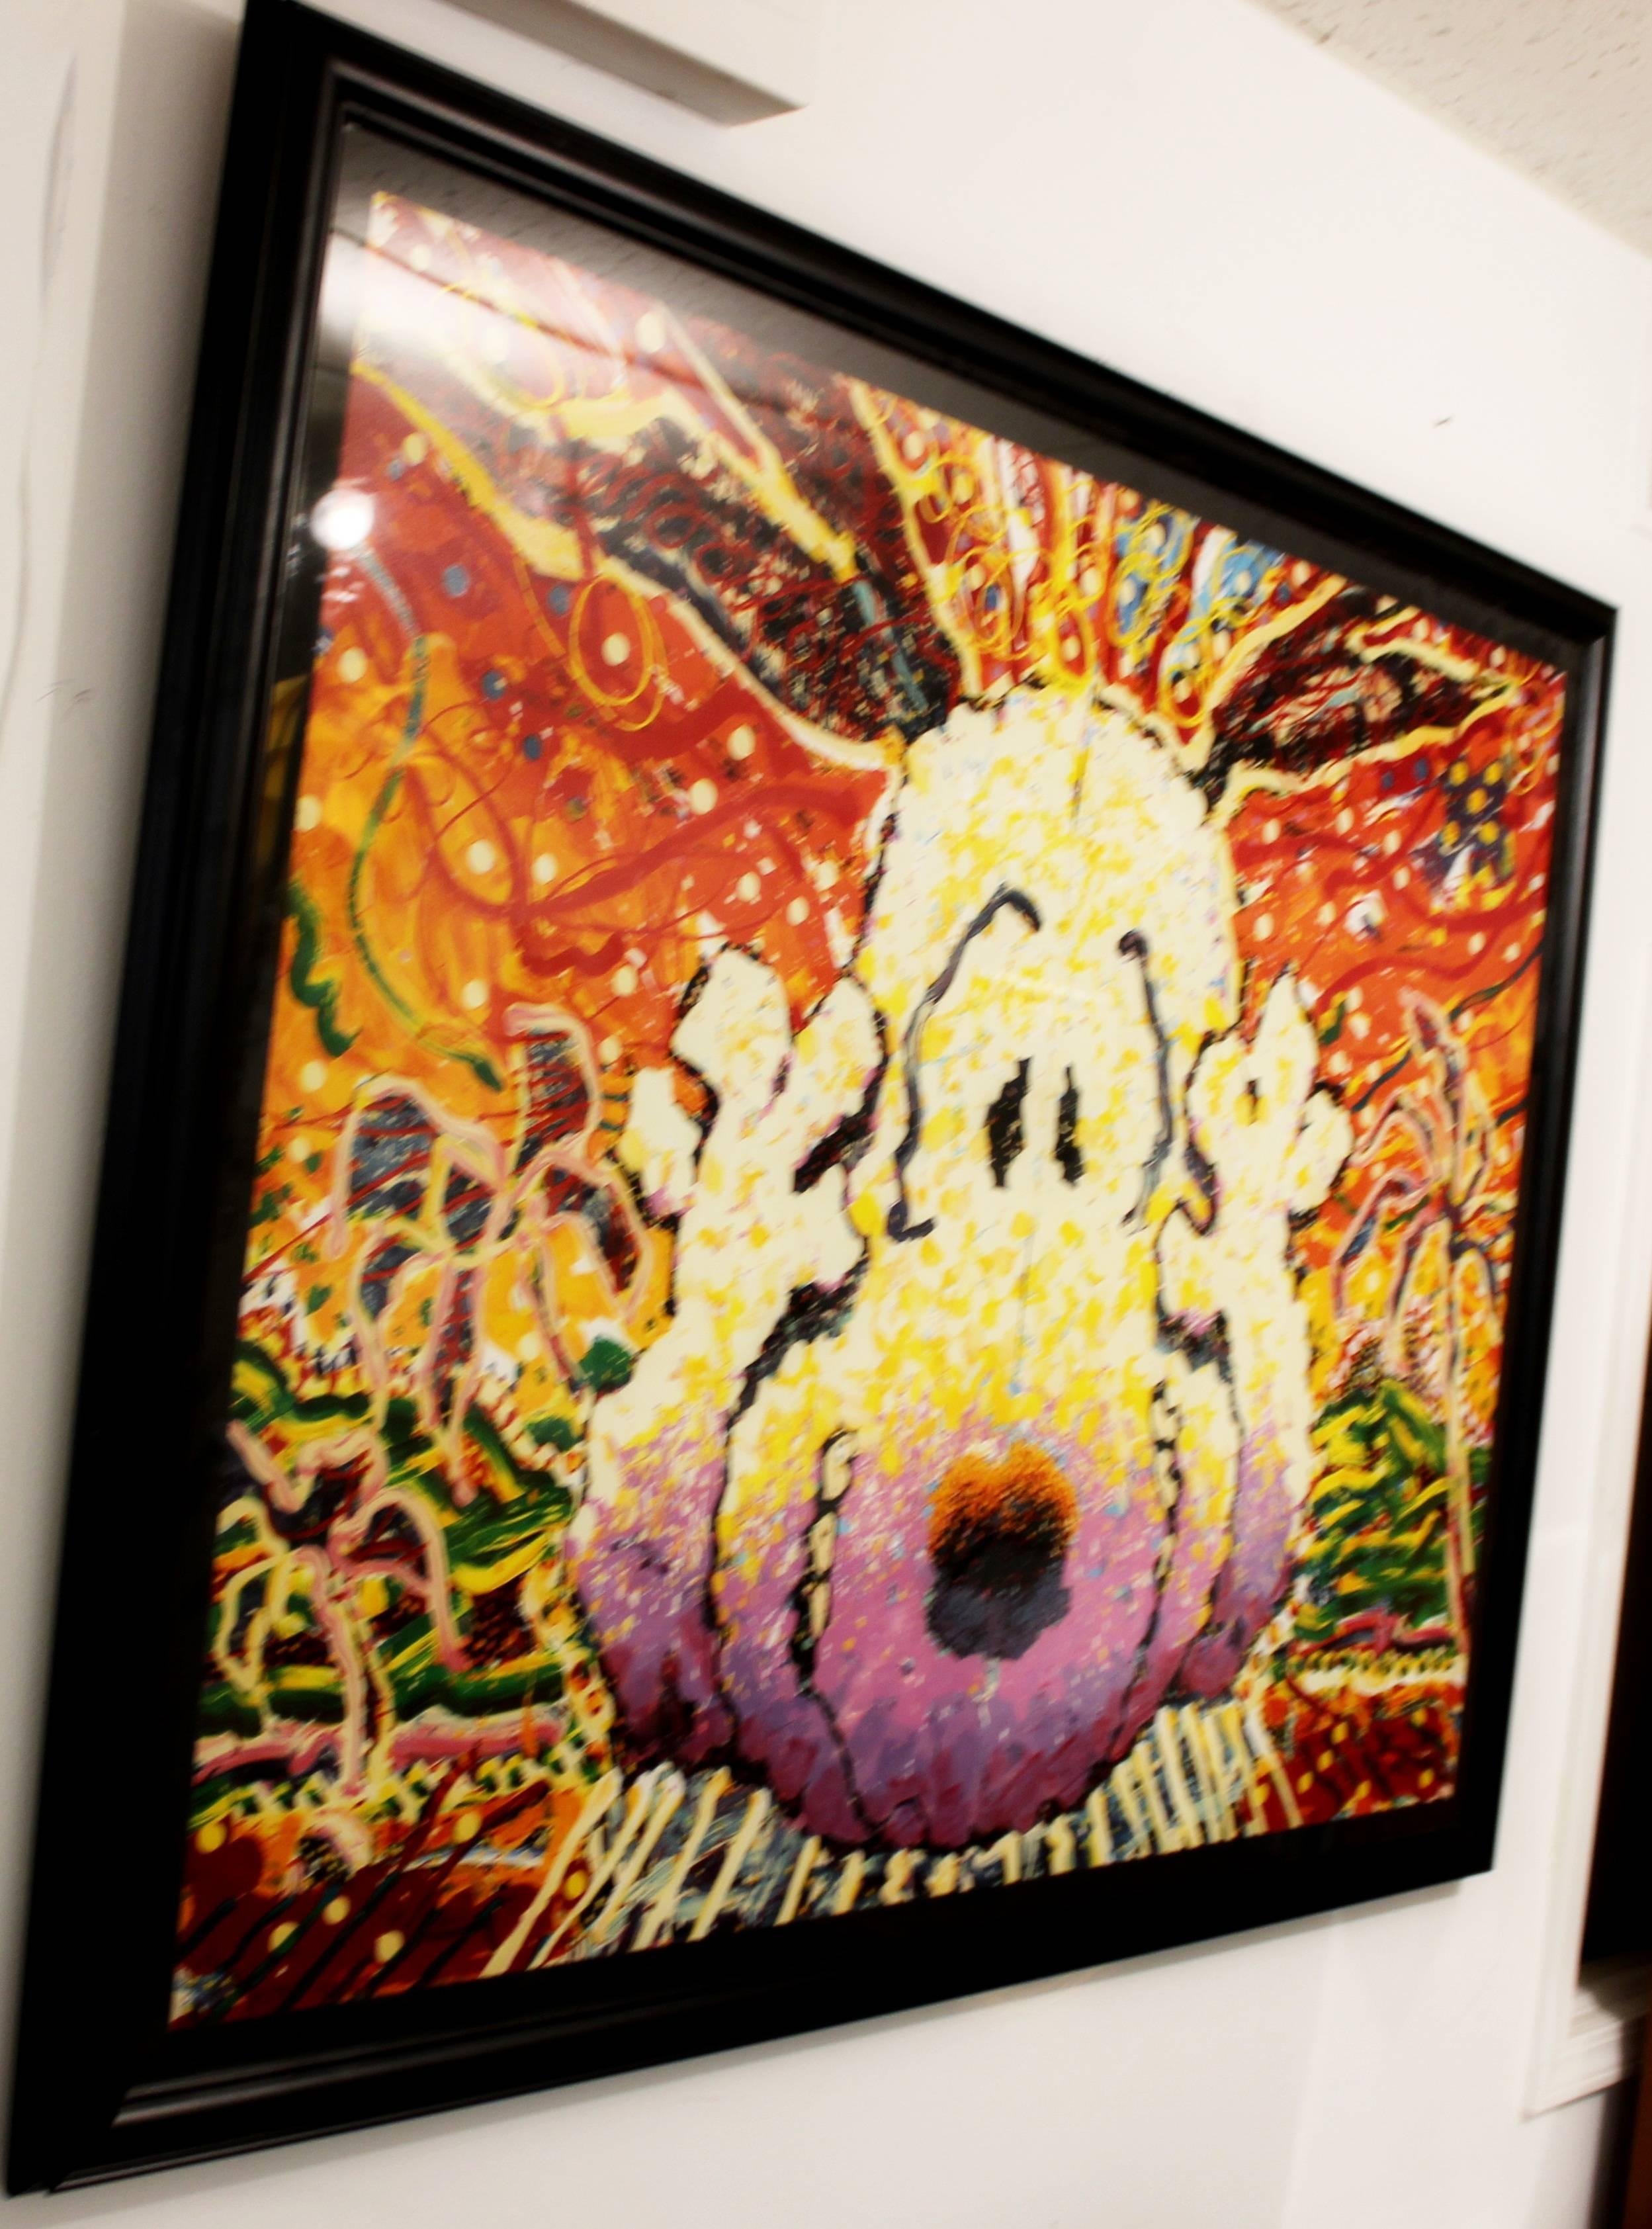 A large, colorful, abstract, Lithograph of the Peanuts character, Snoopy, by Tom Everhart called 